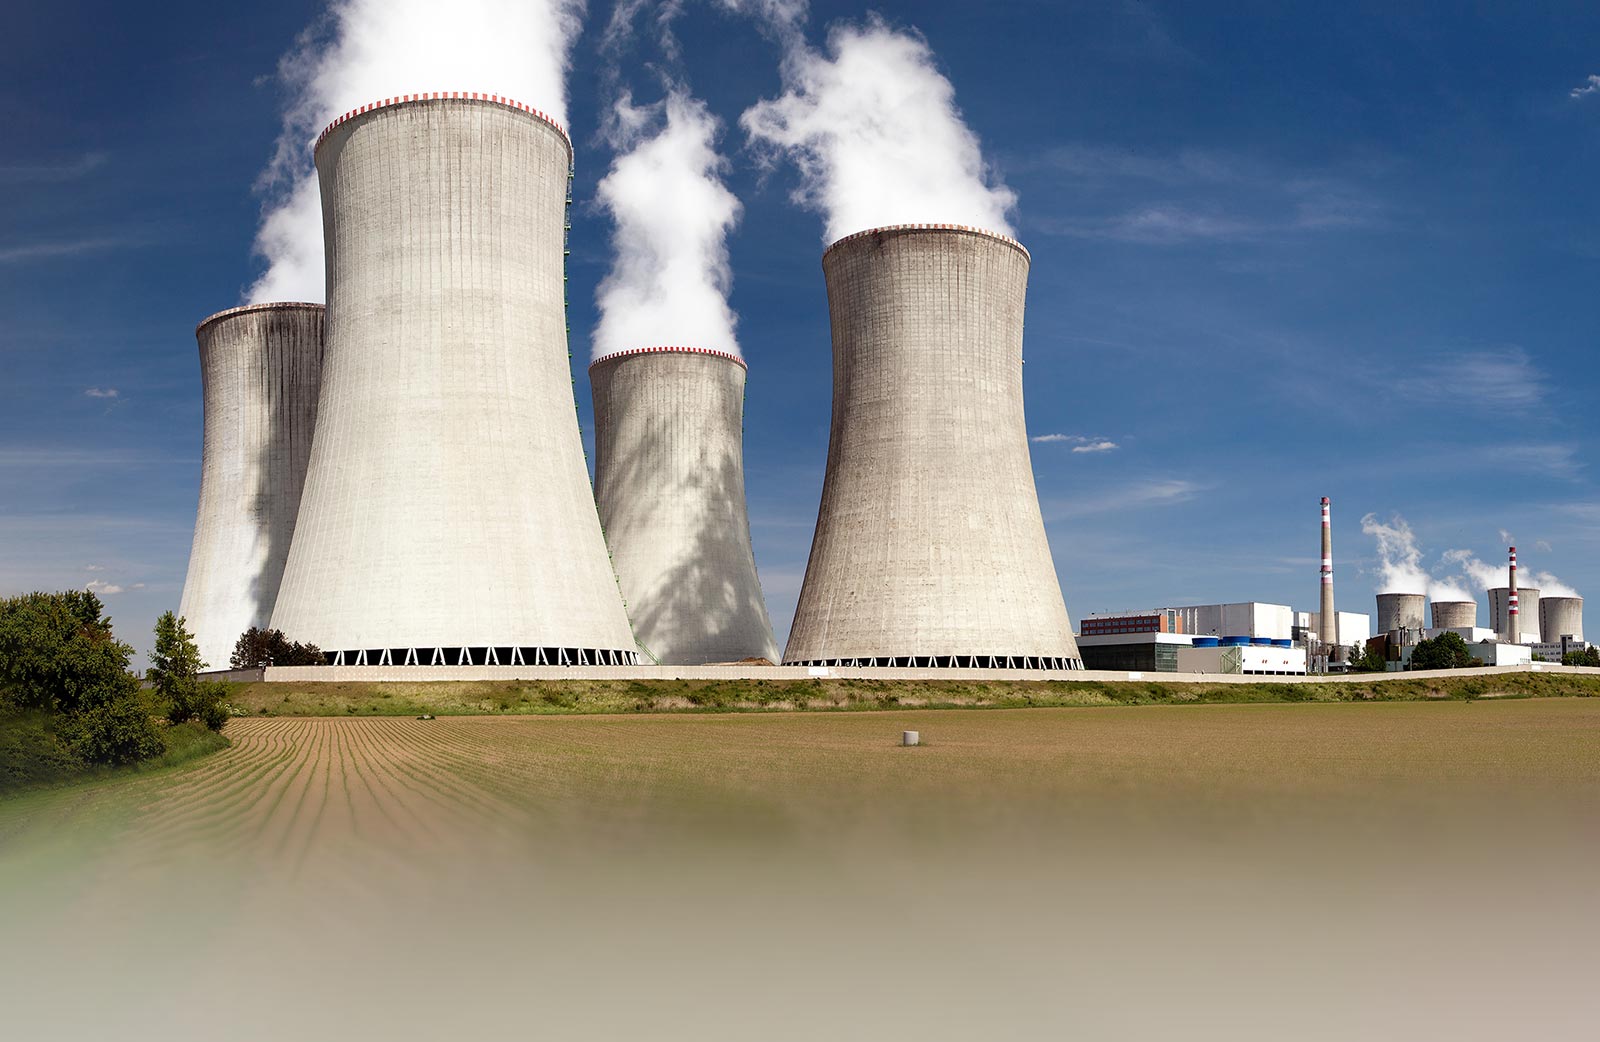 Nuclear power plant with cooling towers operating